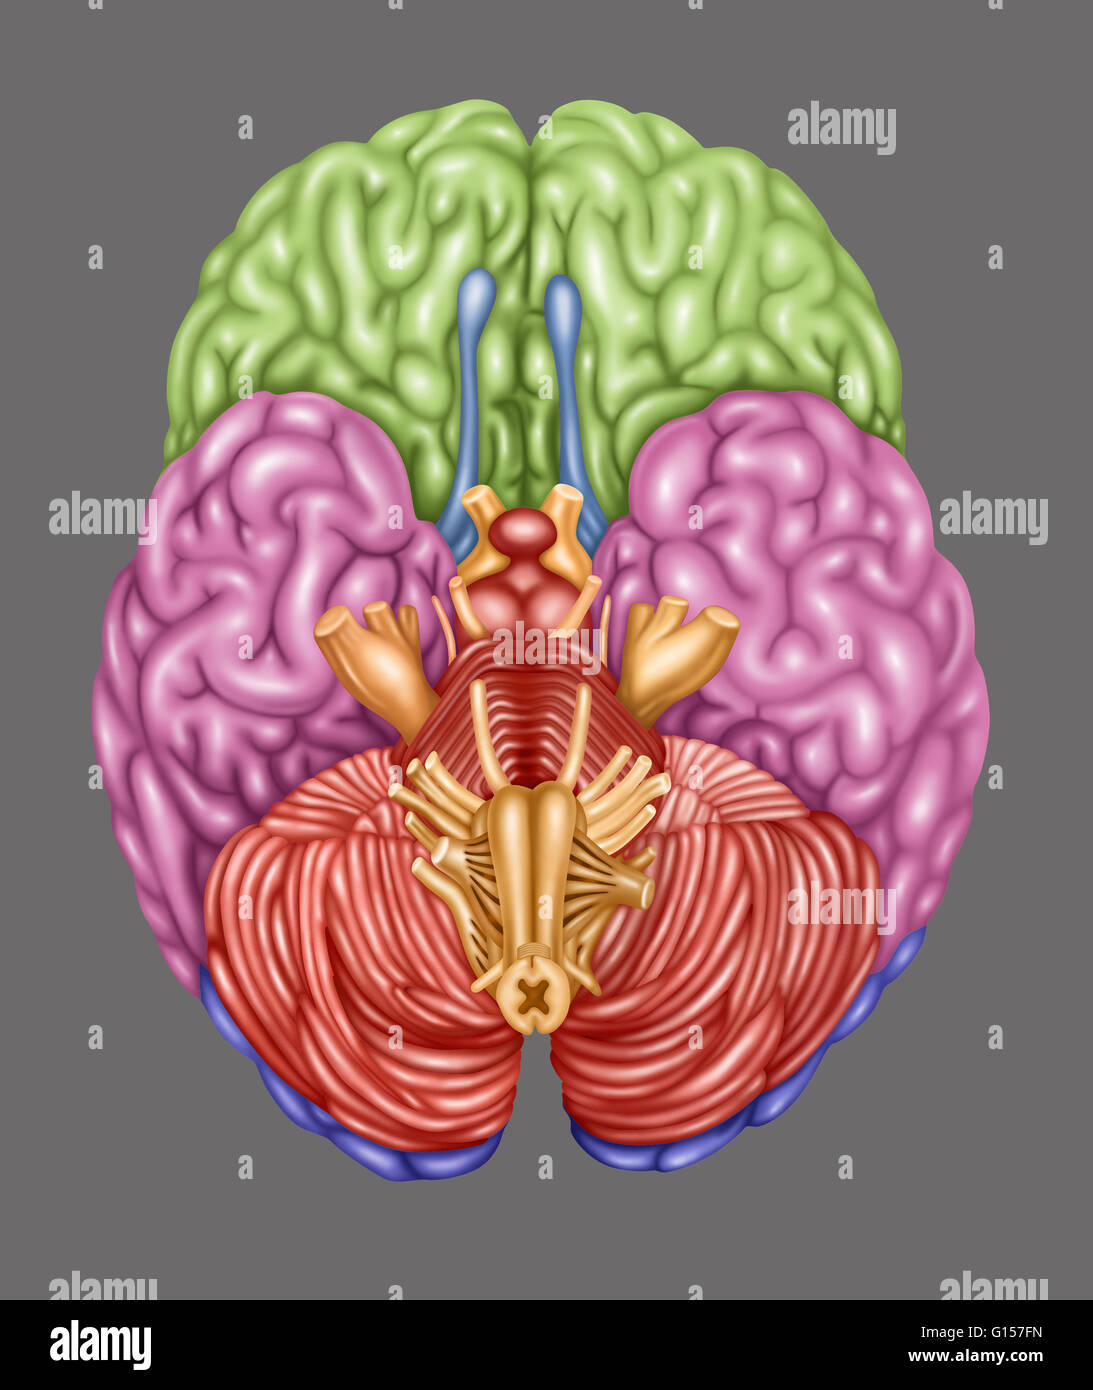 Color coded brain depicting the following areas from an inferior view: frontal lobe (green), temporal lobe (pink), occipital lobe (purple), olfactory (blue), brain stem (orange), cerebellum (orangish-pink). Stock Photo